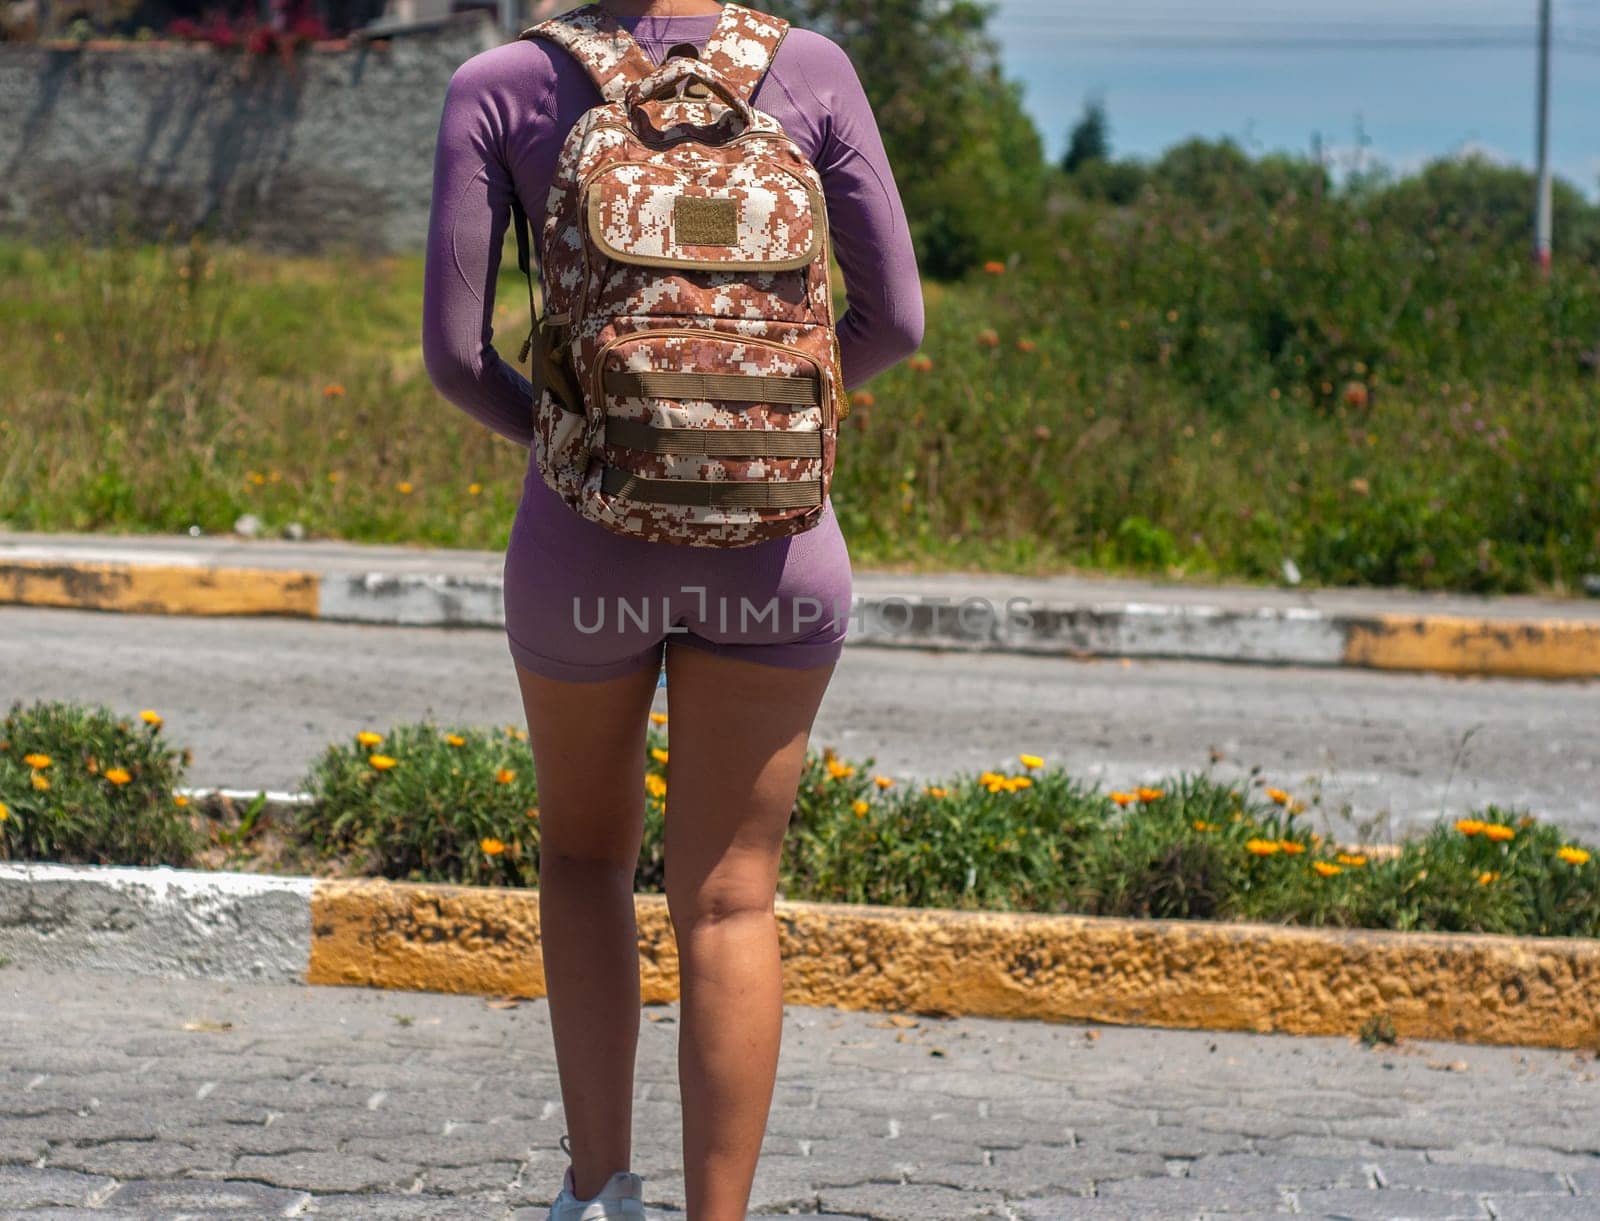 A woman wearing a purple outfit and a patterned backpack stands on the edge of an asphalt road, poised as if waiting or about to embark on a journey. by Raulmartin